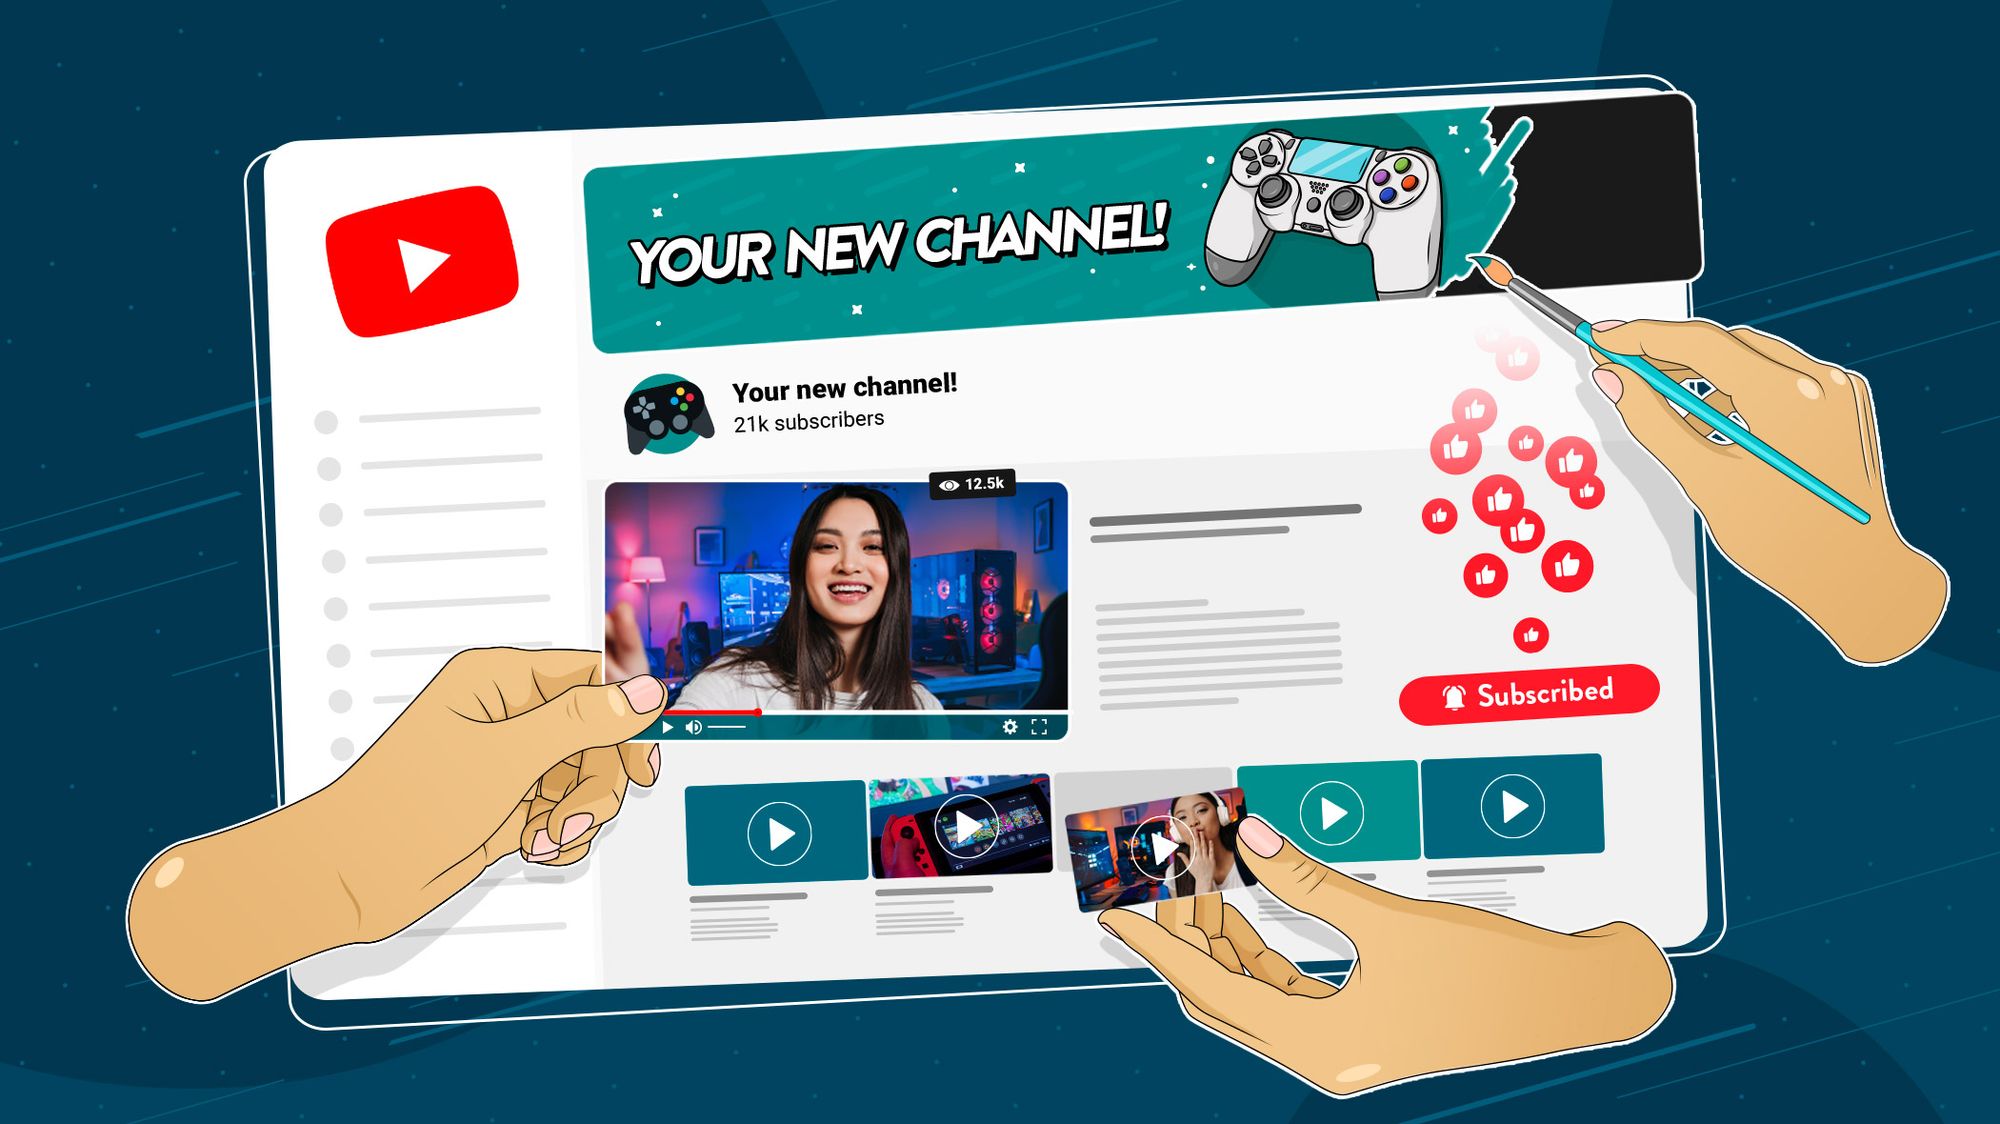 An example of a YouTube channel layout